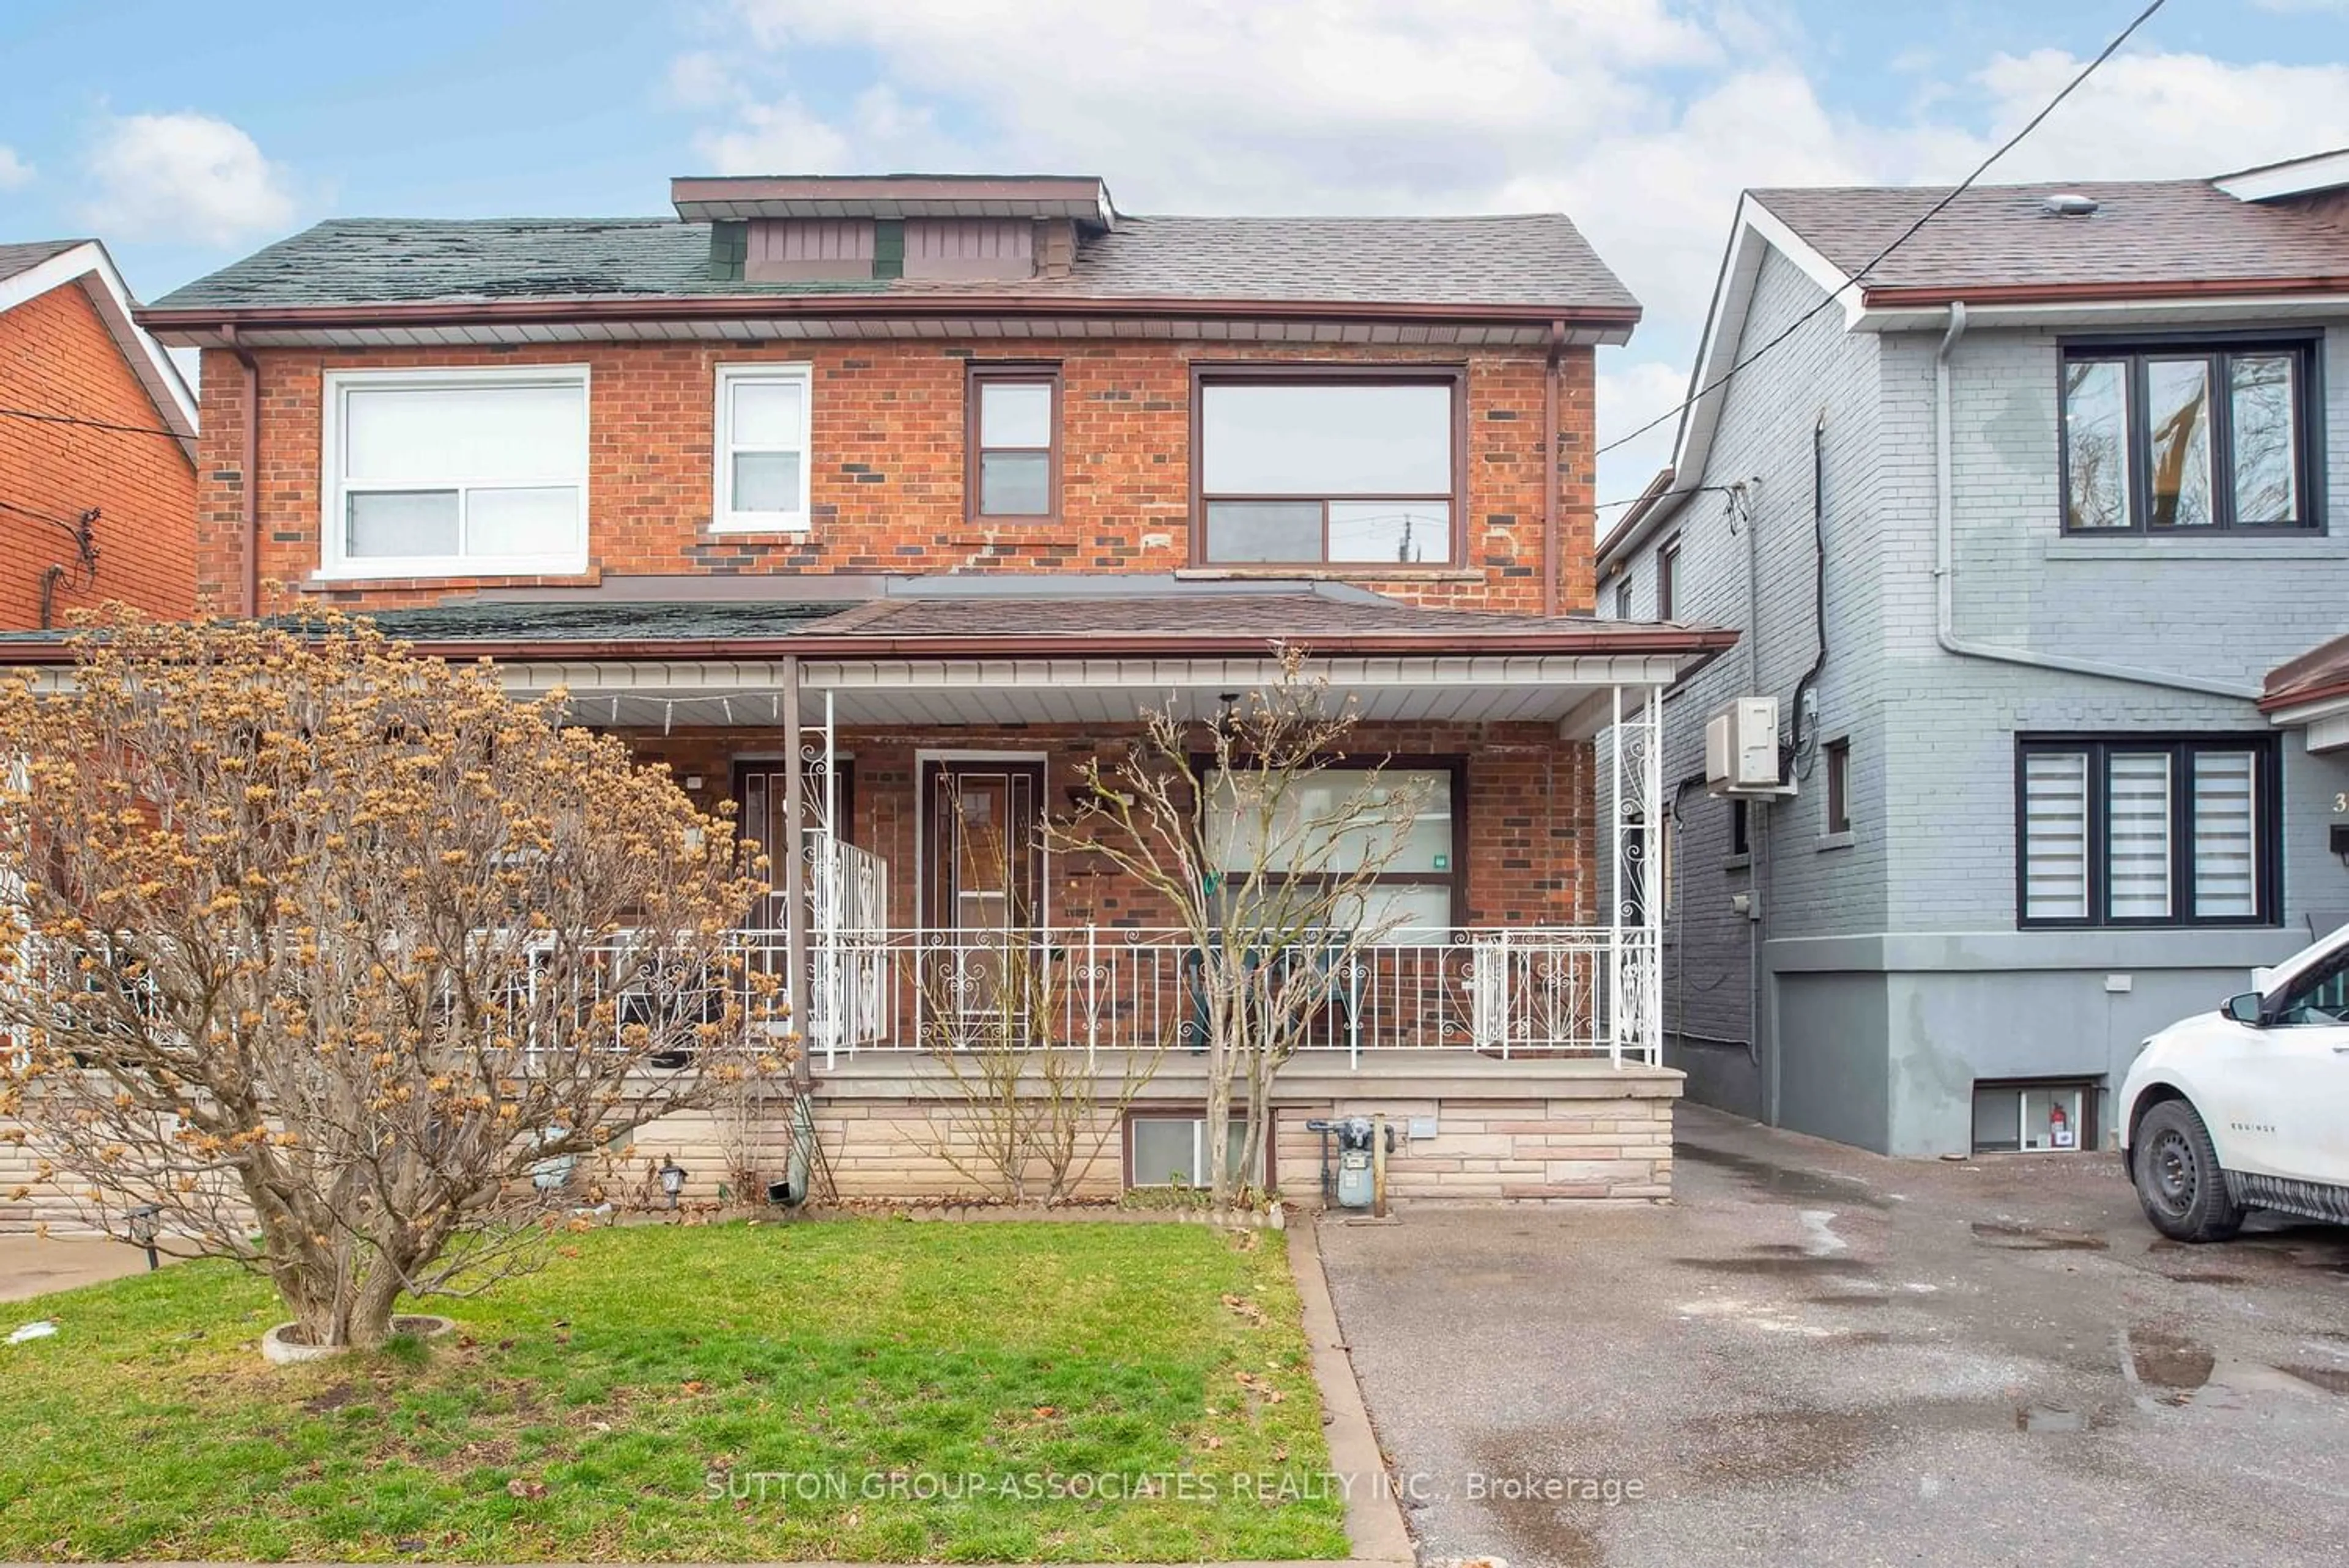 Home with unknown exterior material for 355 Atlas Ave, Toronto Ontario M6C 3P8